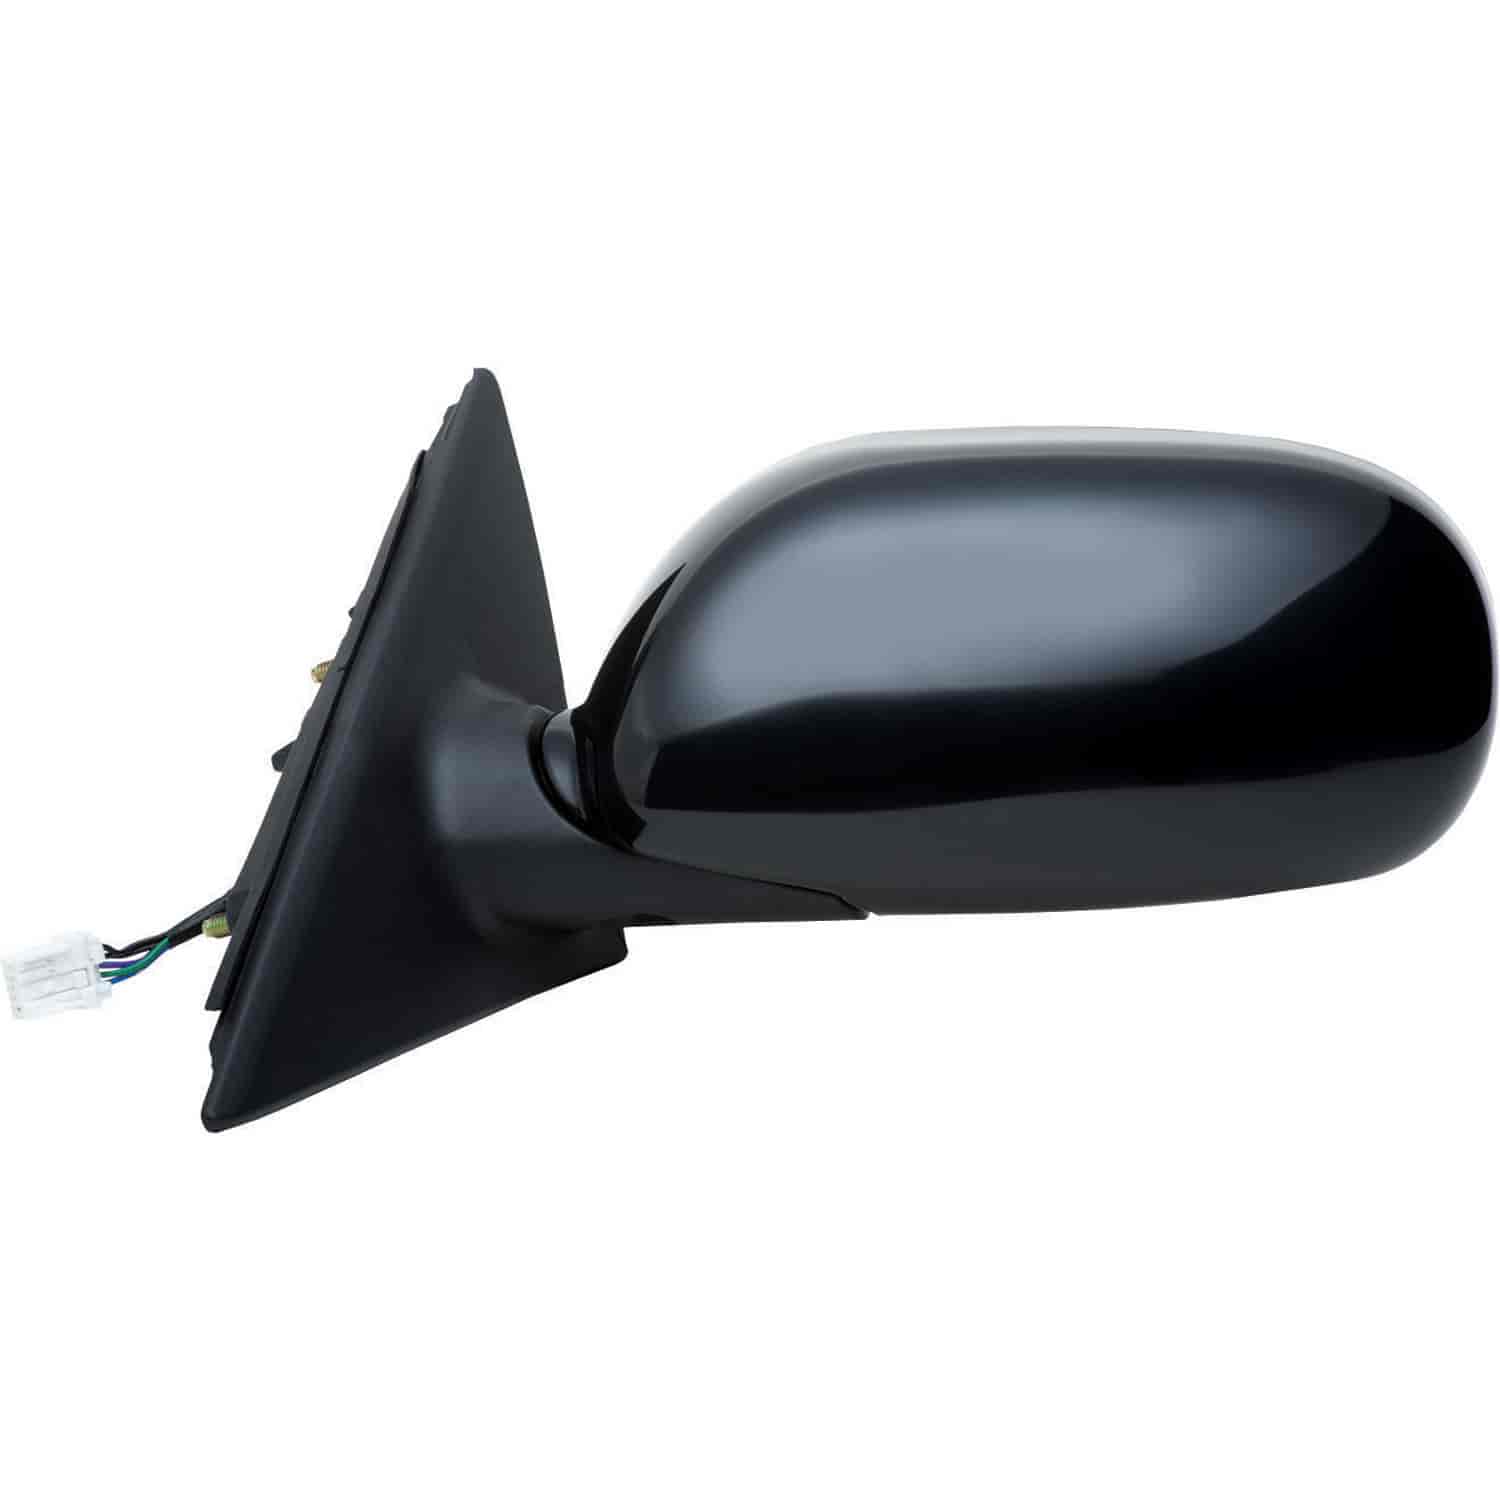 OEM Style Replacement mirror for 03-06 INFINITY G35 Sedan driver side mirror tested to fit and funct